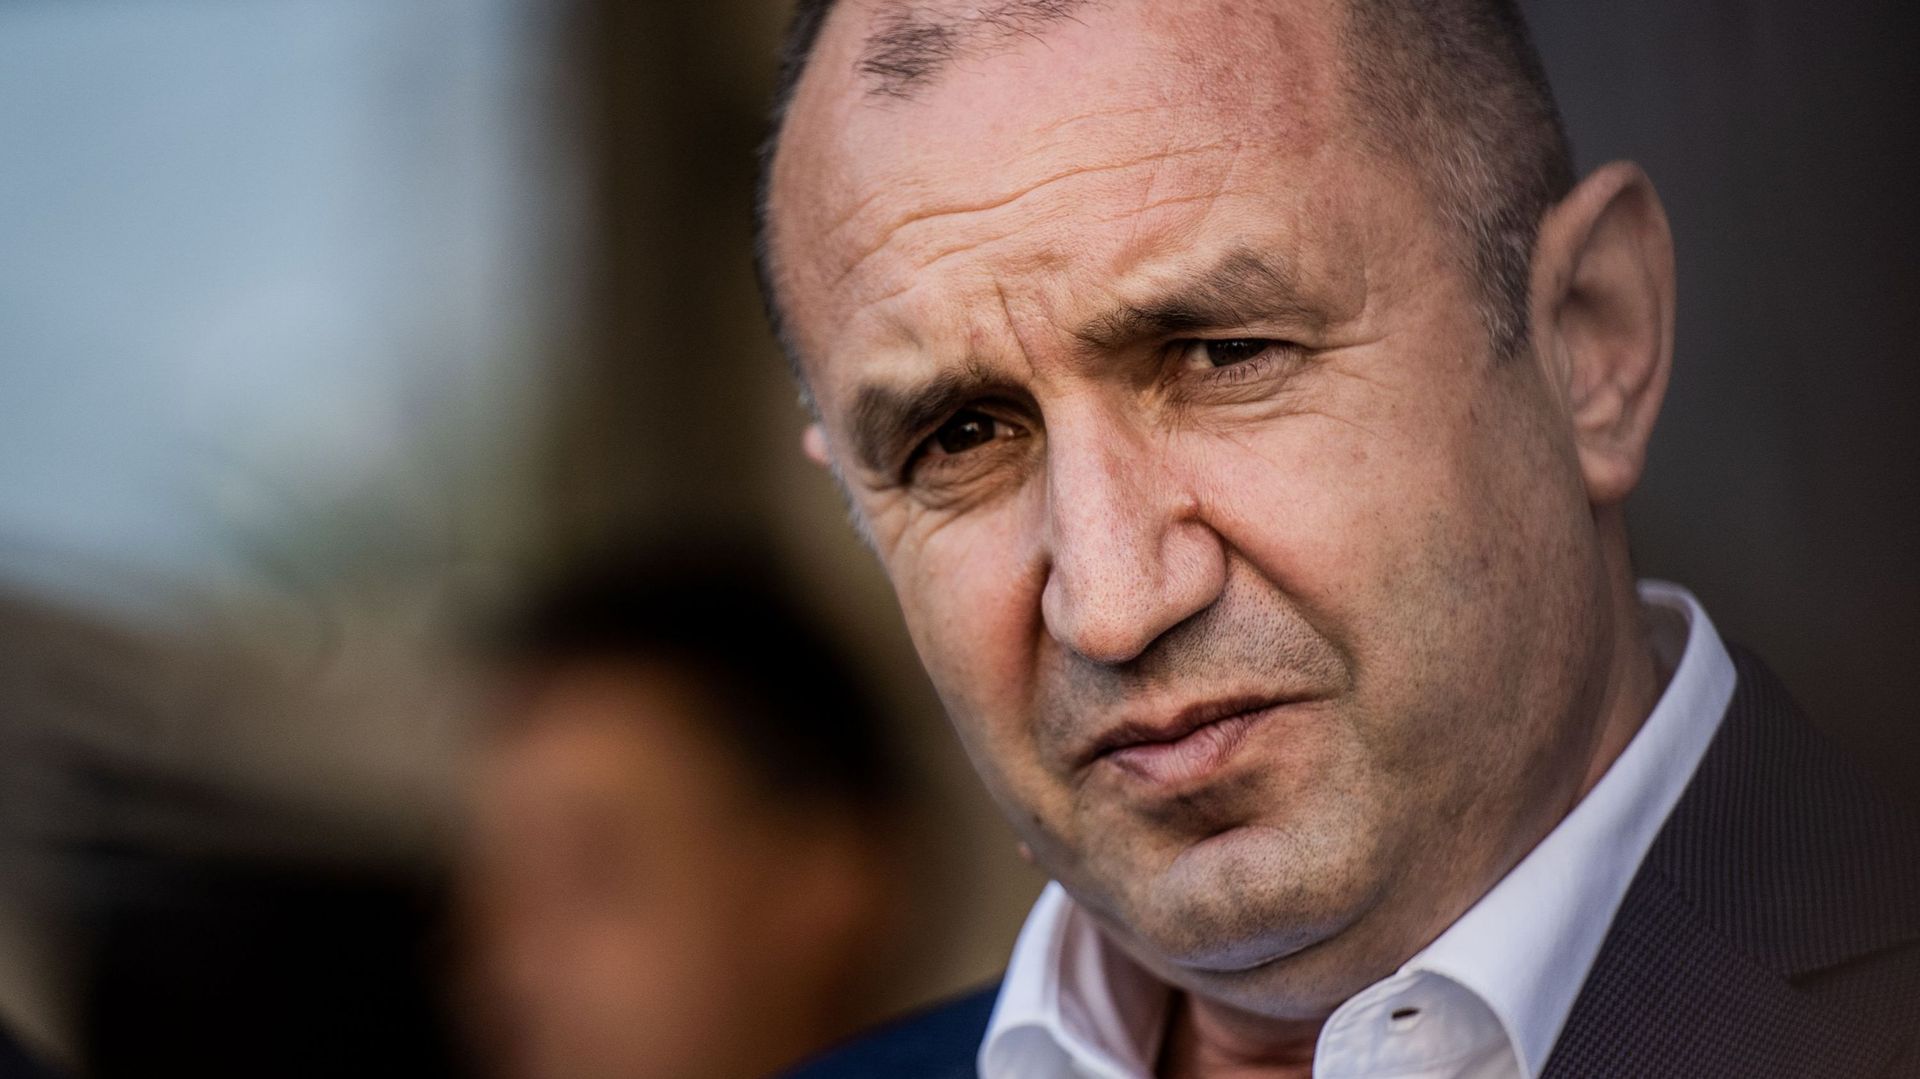 Bulgaria Heads To Polls In Second Snap Elections As Corruption Scandals Multiply